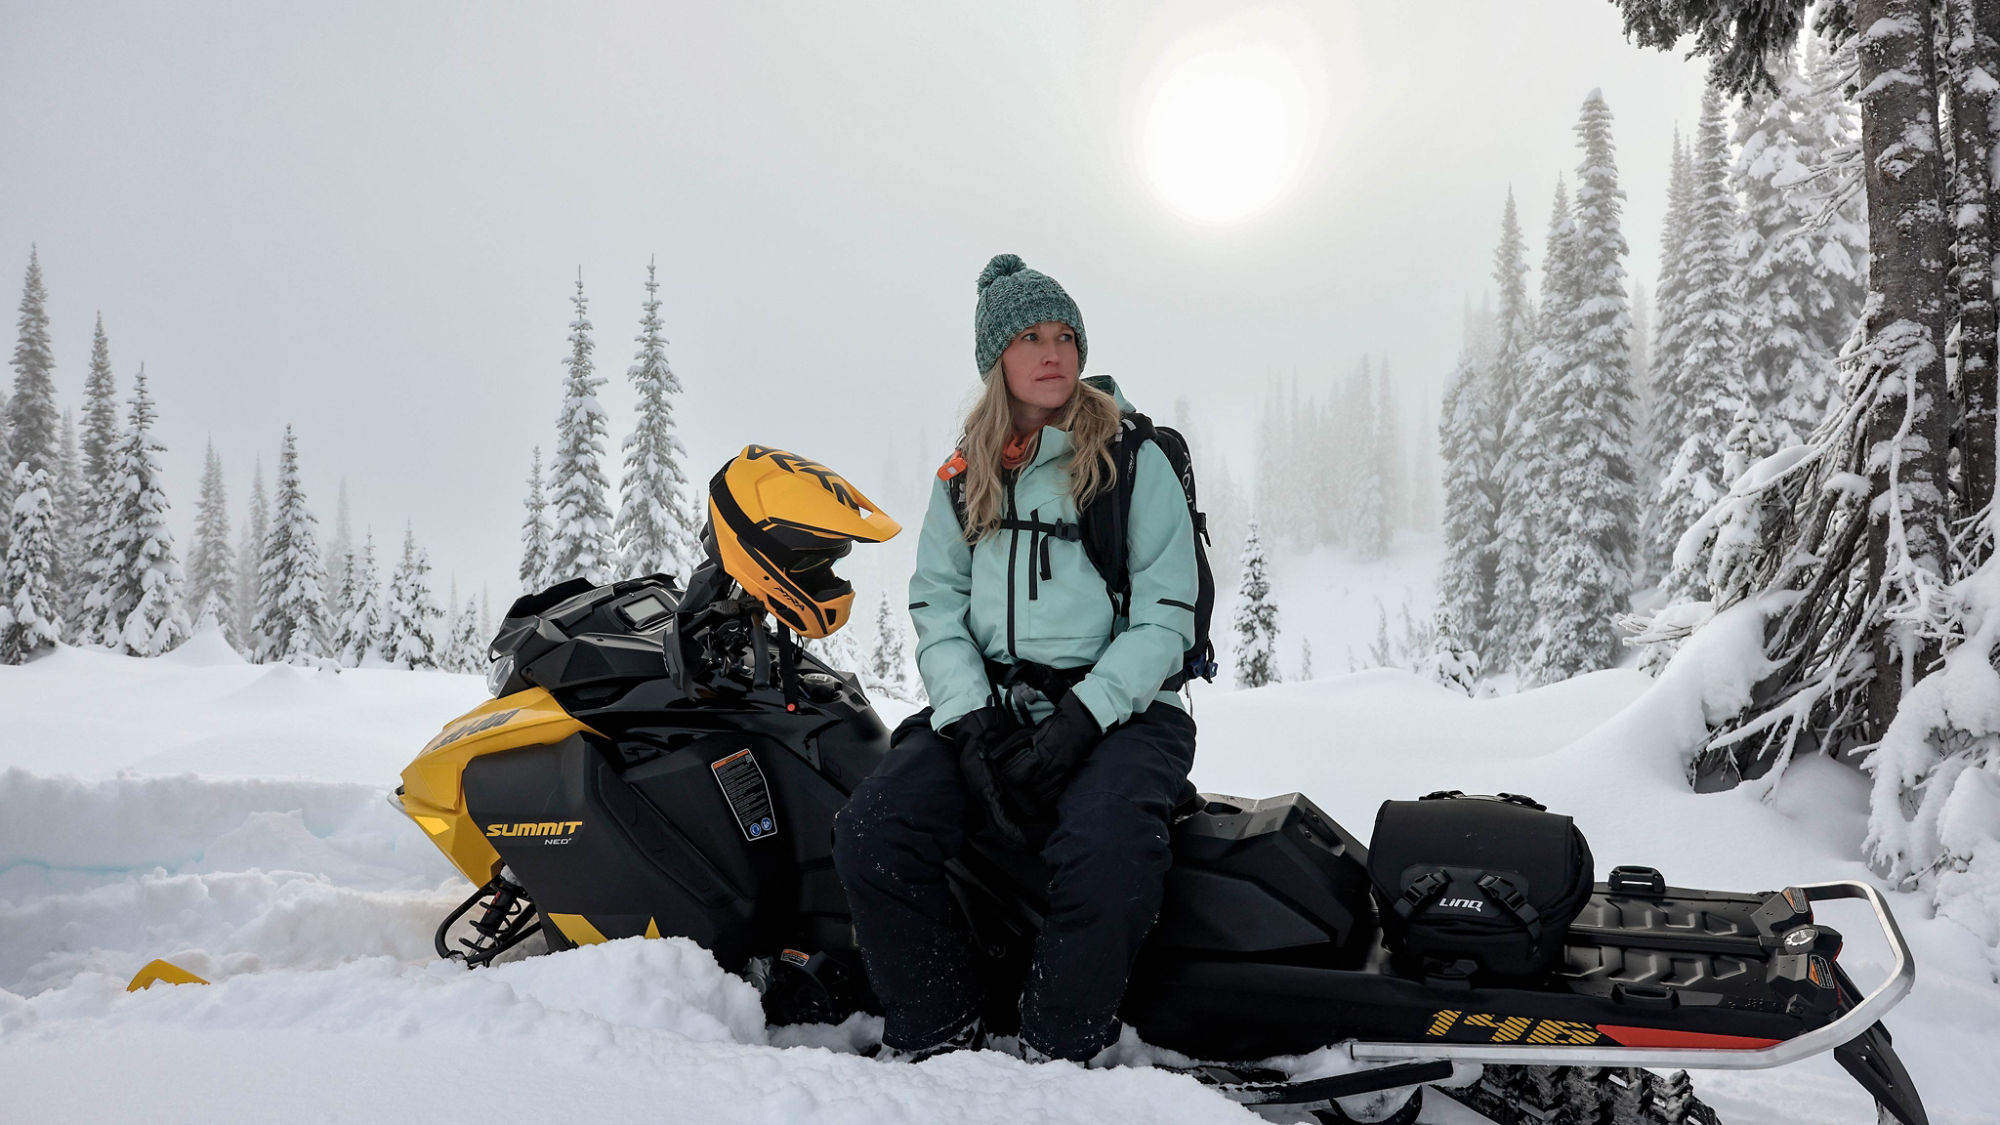 Woman taking a break from riding on her 2025 Ski-Doo NEO+ deep snow snowmobile